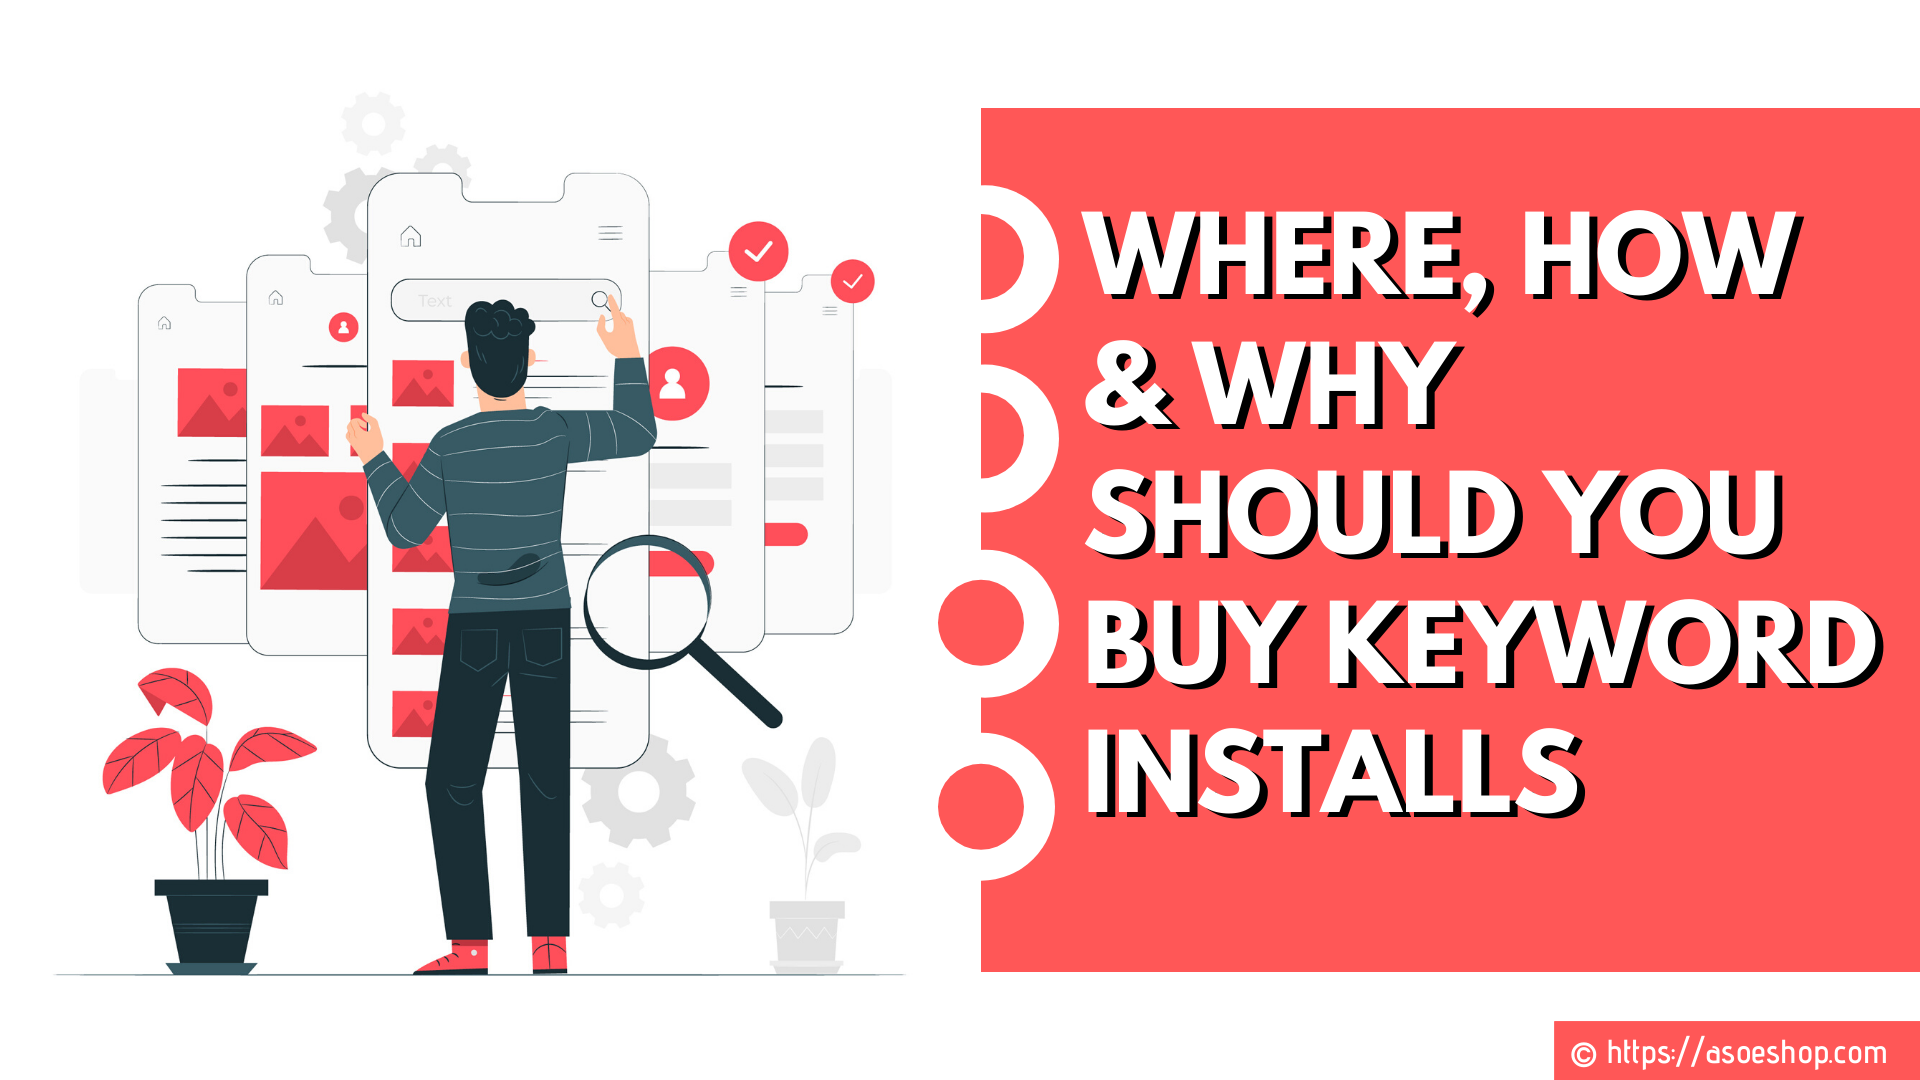 Where, How & Why should you Buy Keyword Installs for Android, iOS Apps